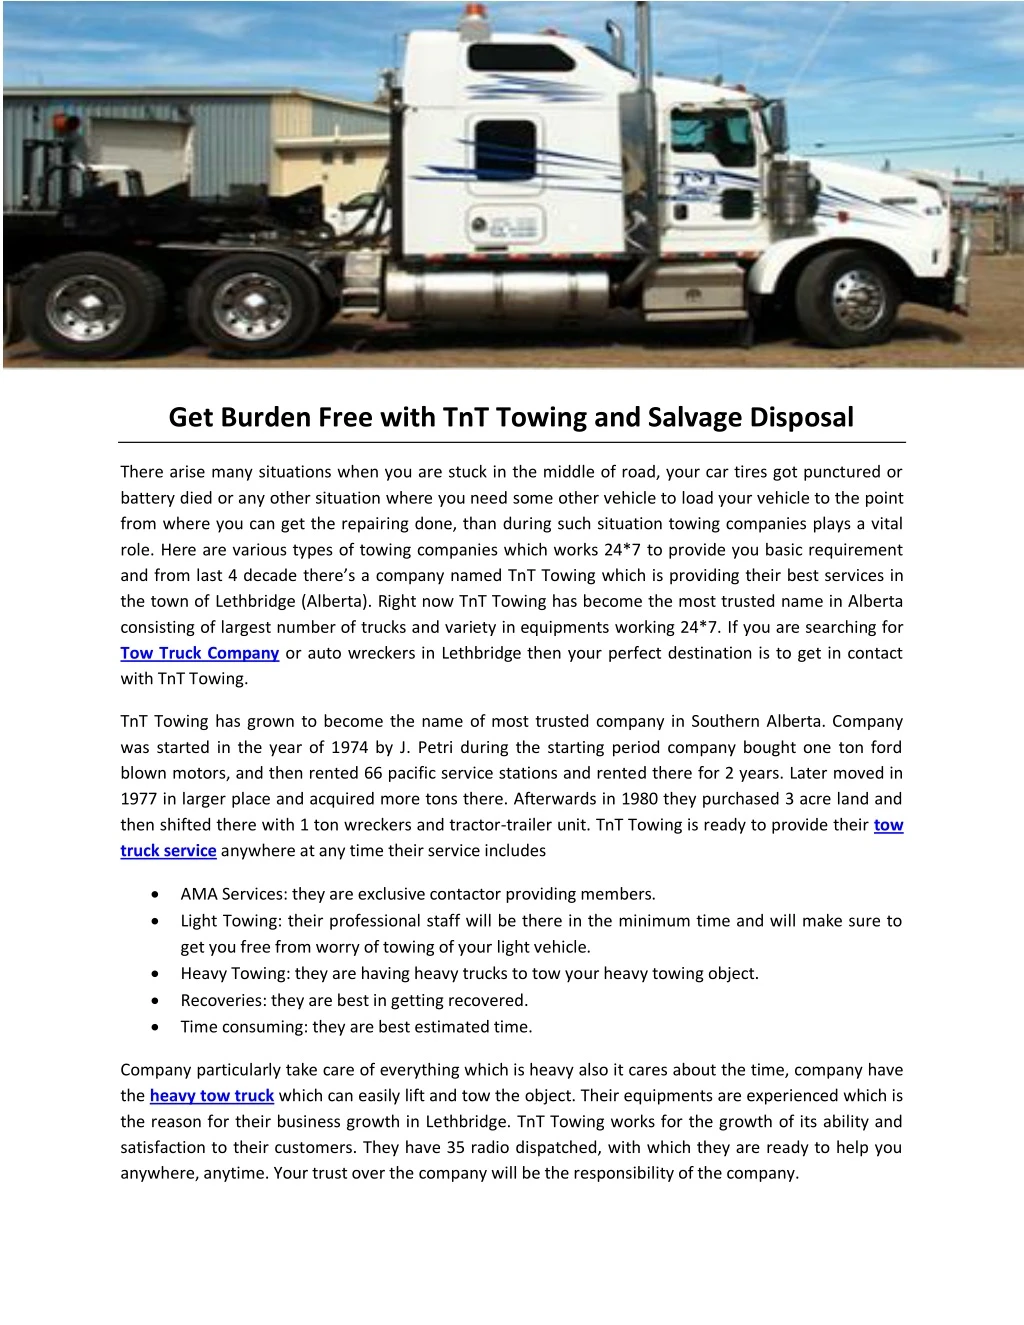 get burden free with tnt towing and salvage